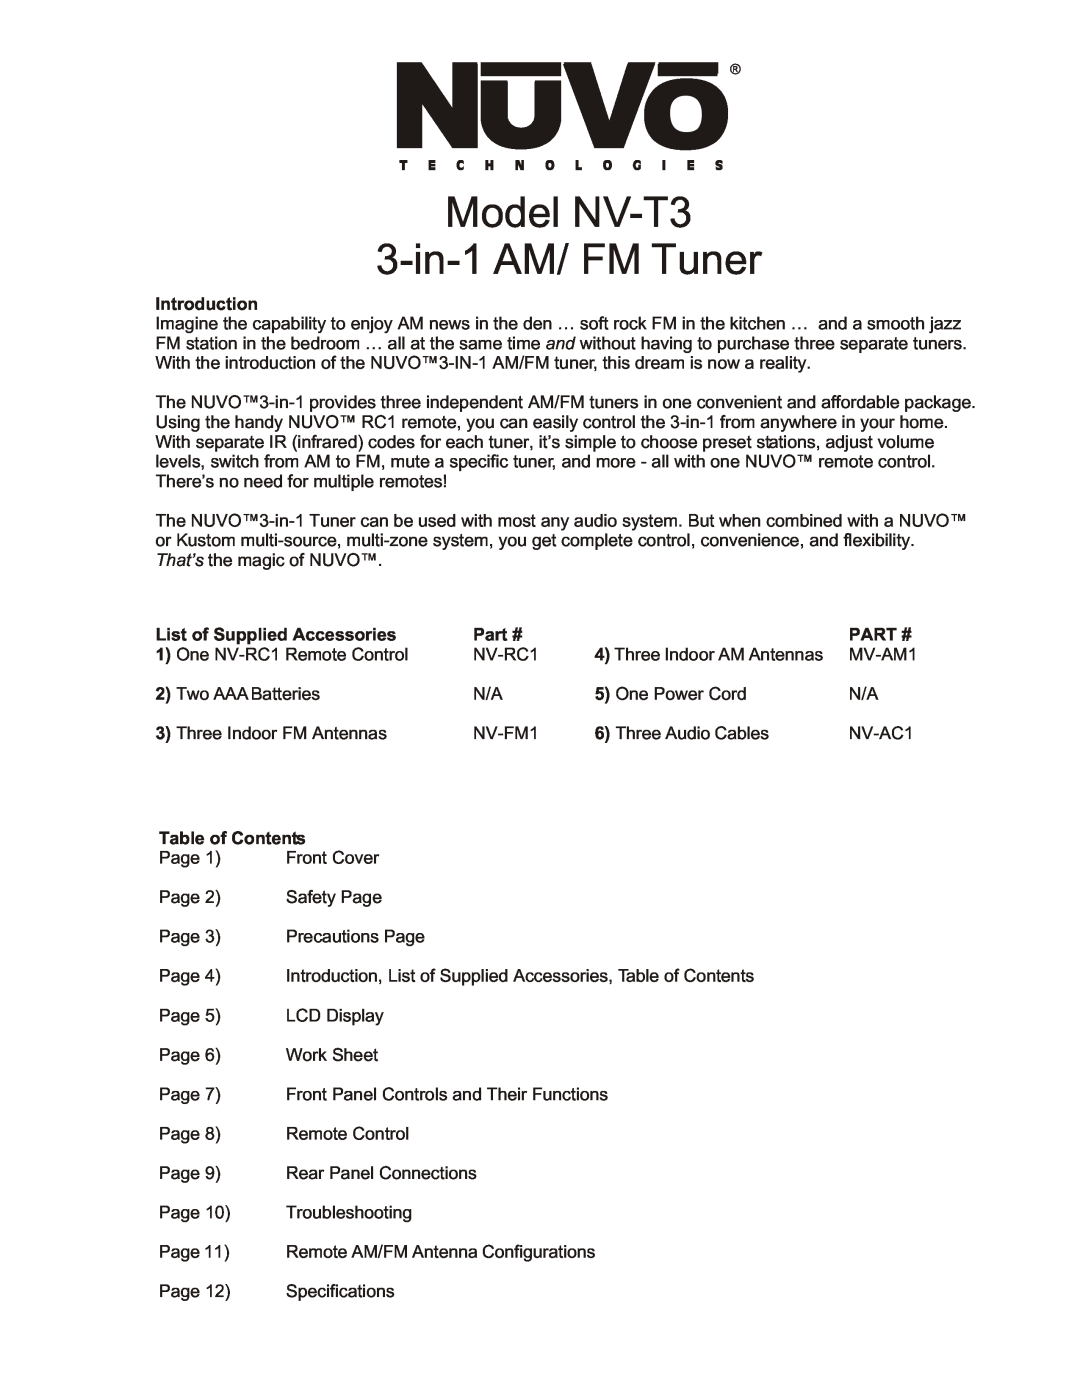 Nuvo owner manual Model NV-T3 3-in-1AM/ FM Tuner, Introduction, List of Supplied Accessories, Part #, Table of Contents 